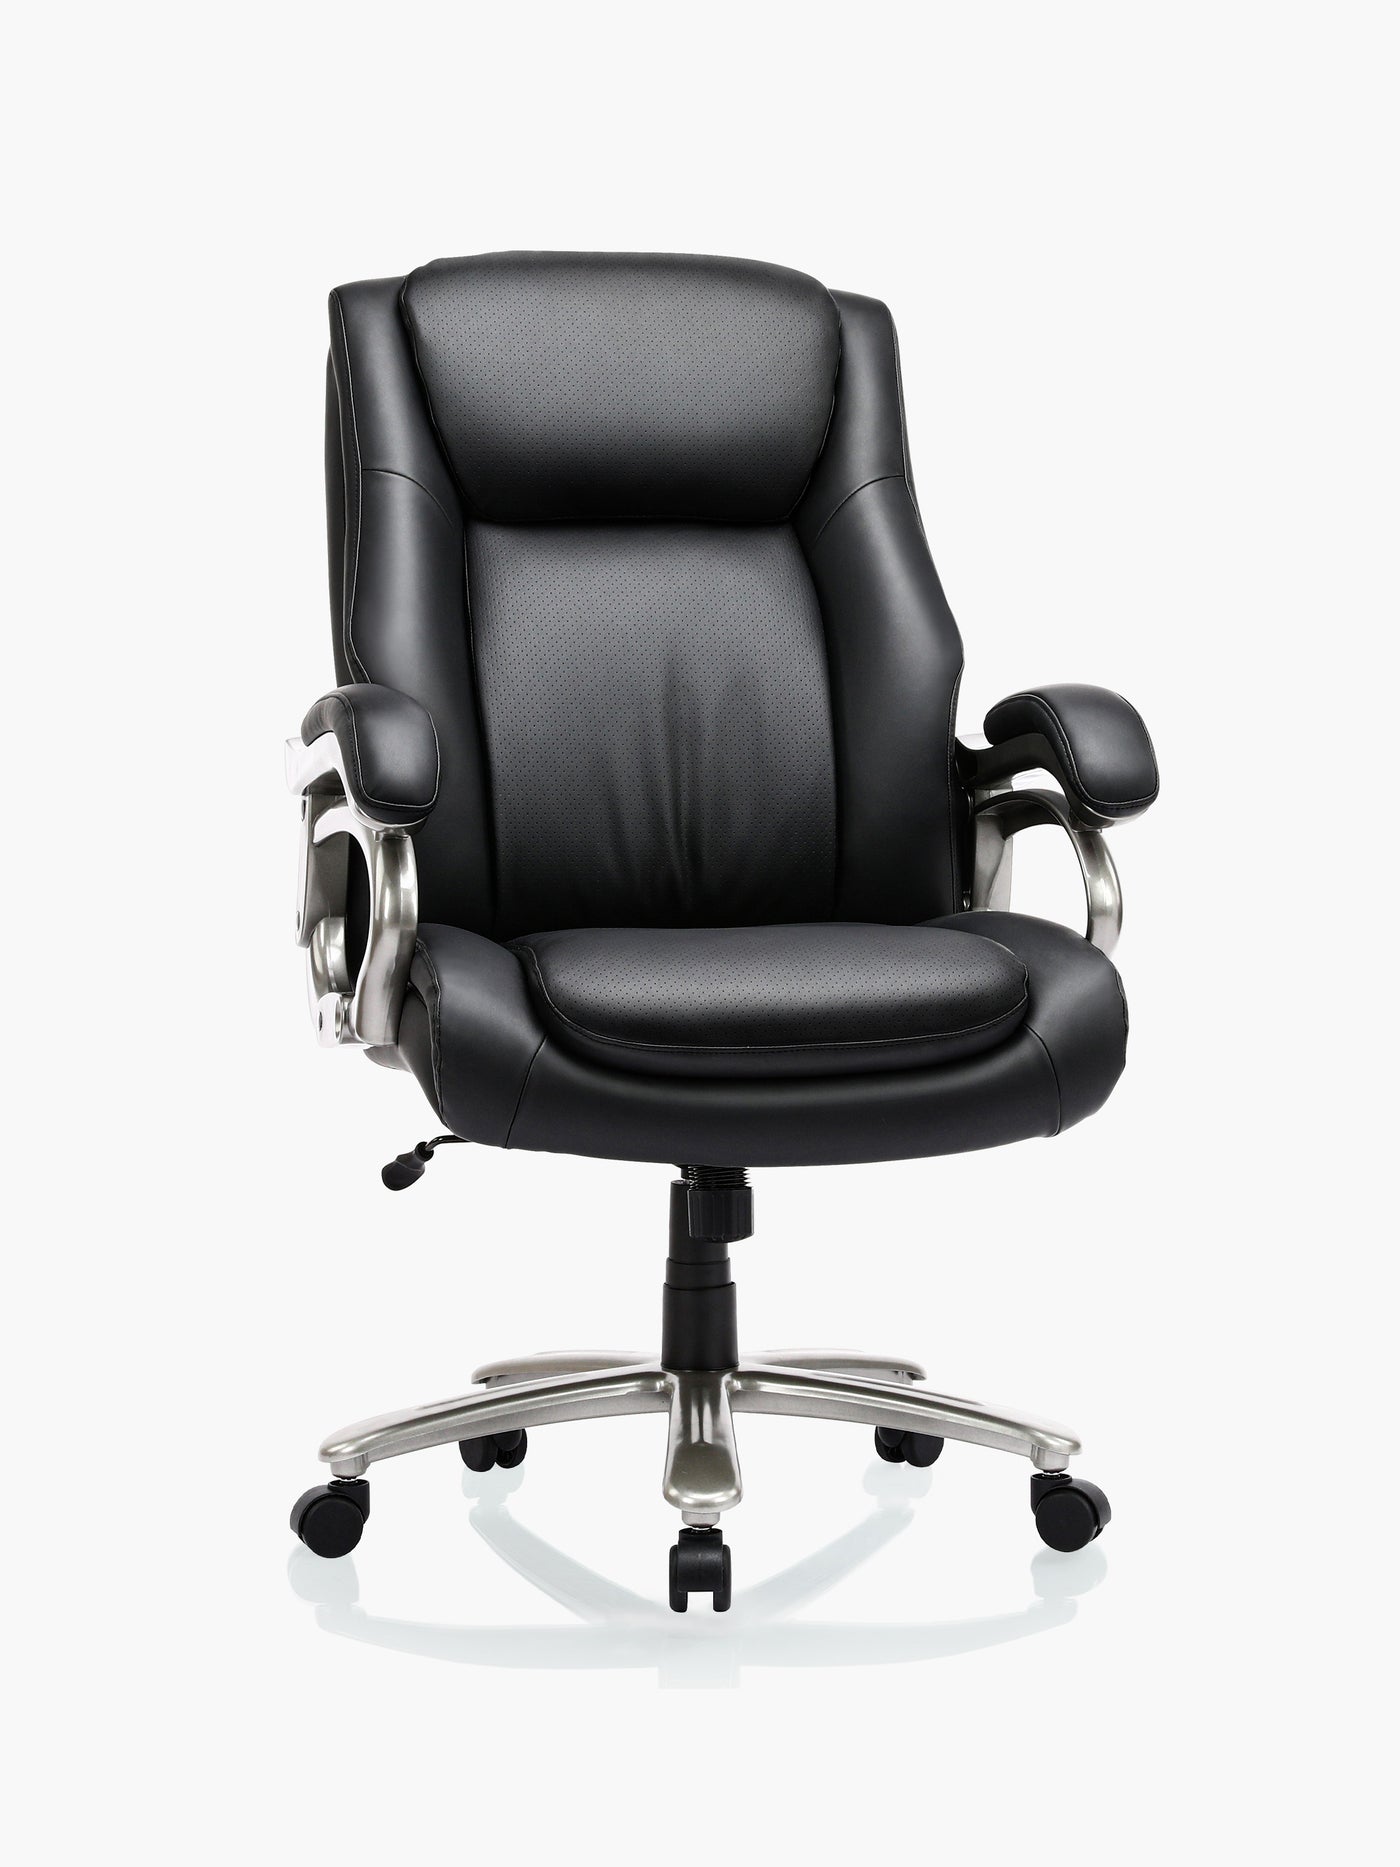 COLAMY Ergonomic Big and Tall PU Leather Office chair CL5103 Brown #color_black